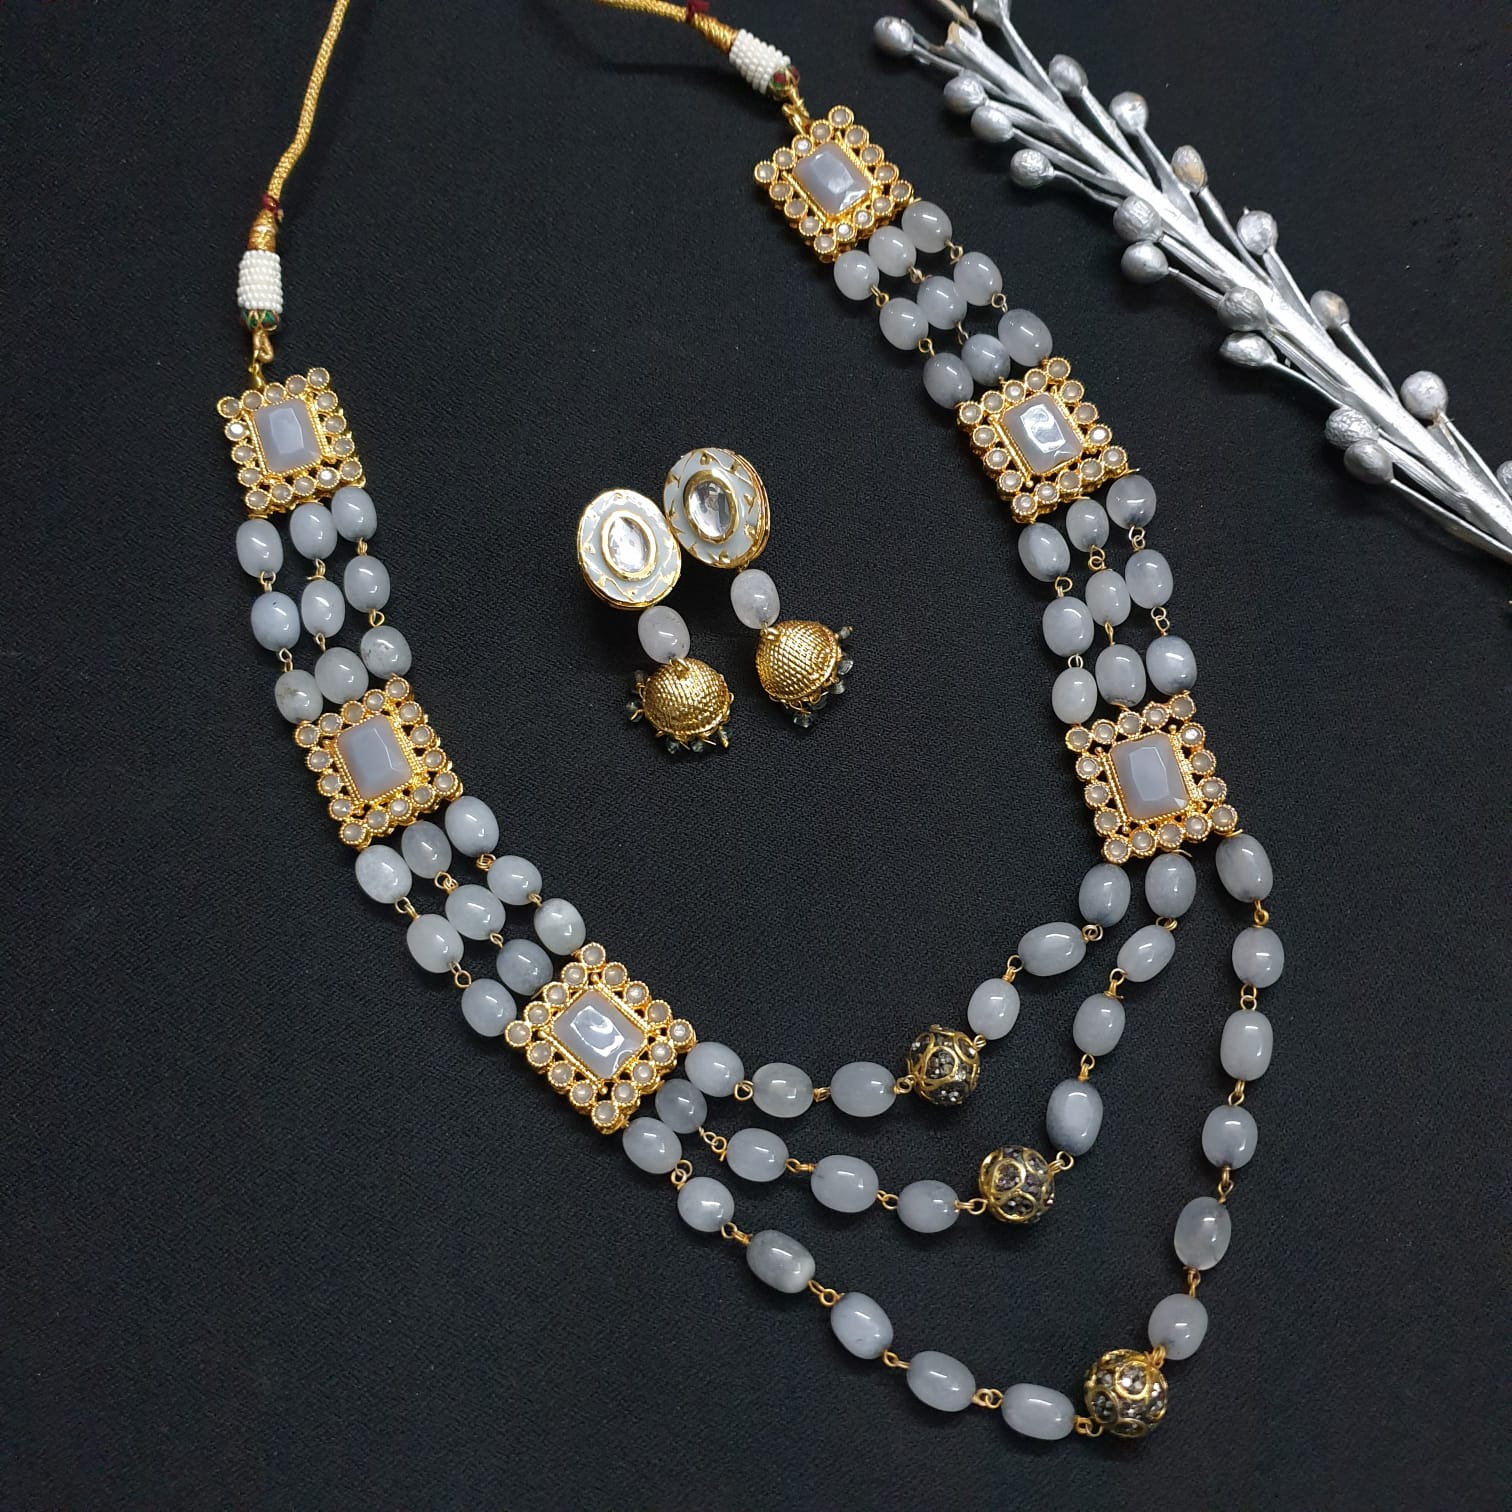 Designer Grey Stone Necklace With Earrings